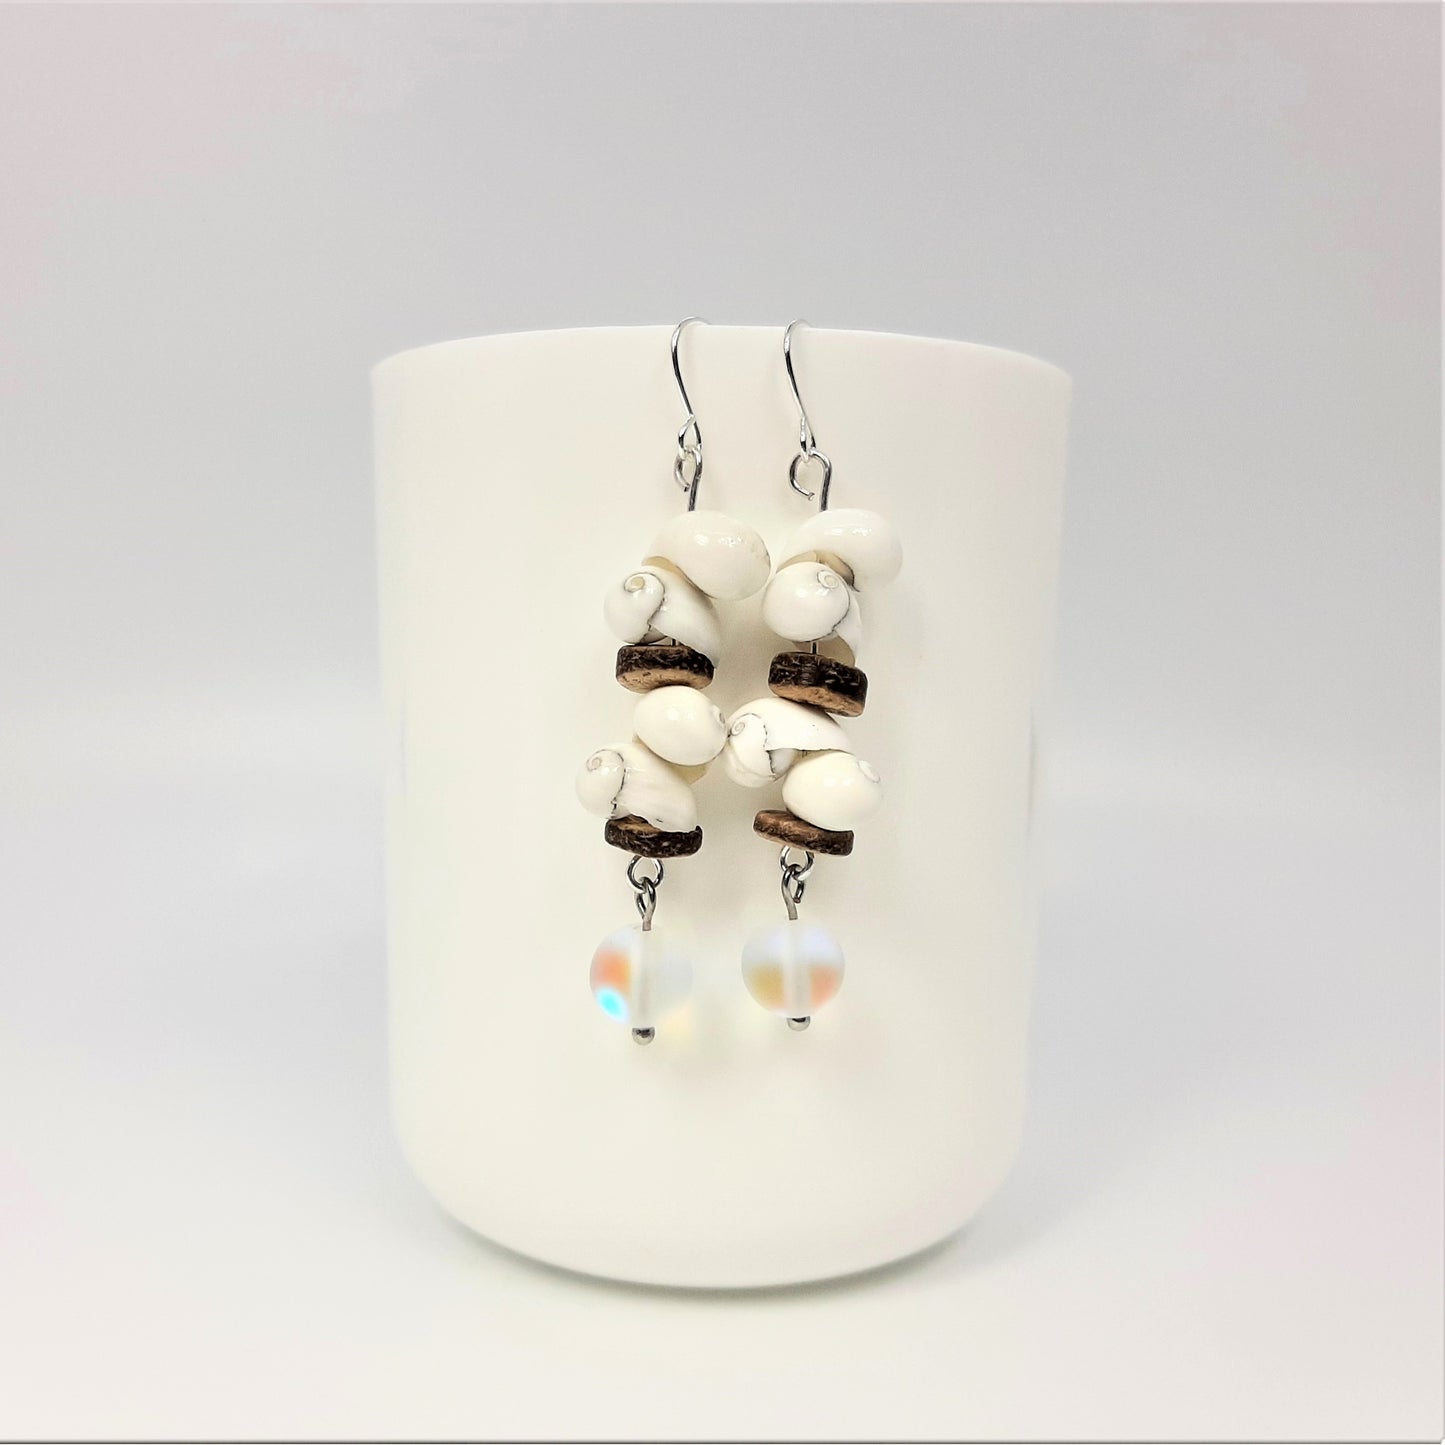 Snail Shell White + Coconut Spacers + Iridescent Fused Glass Earrings